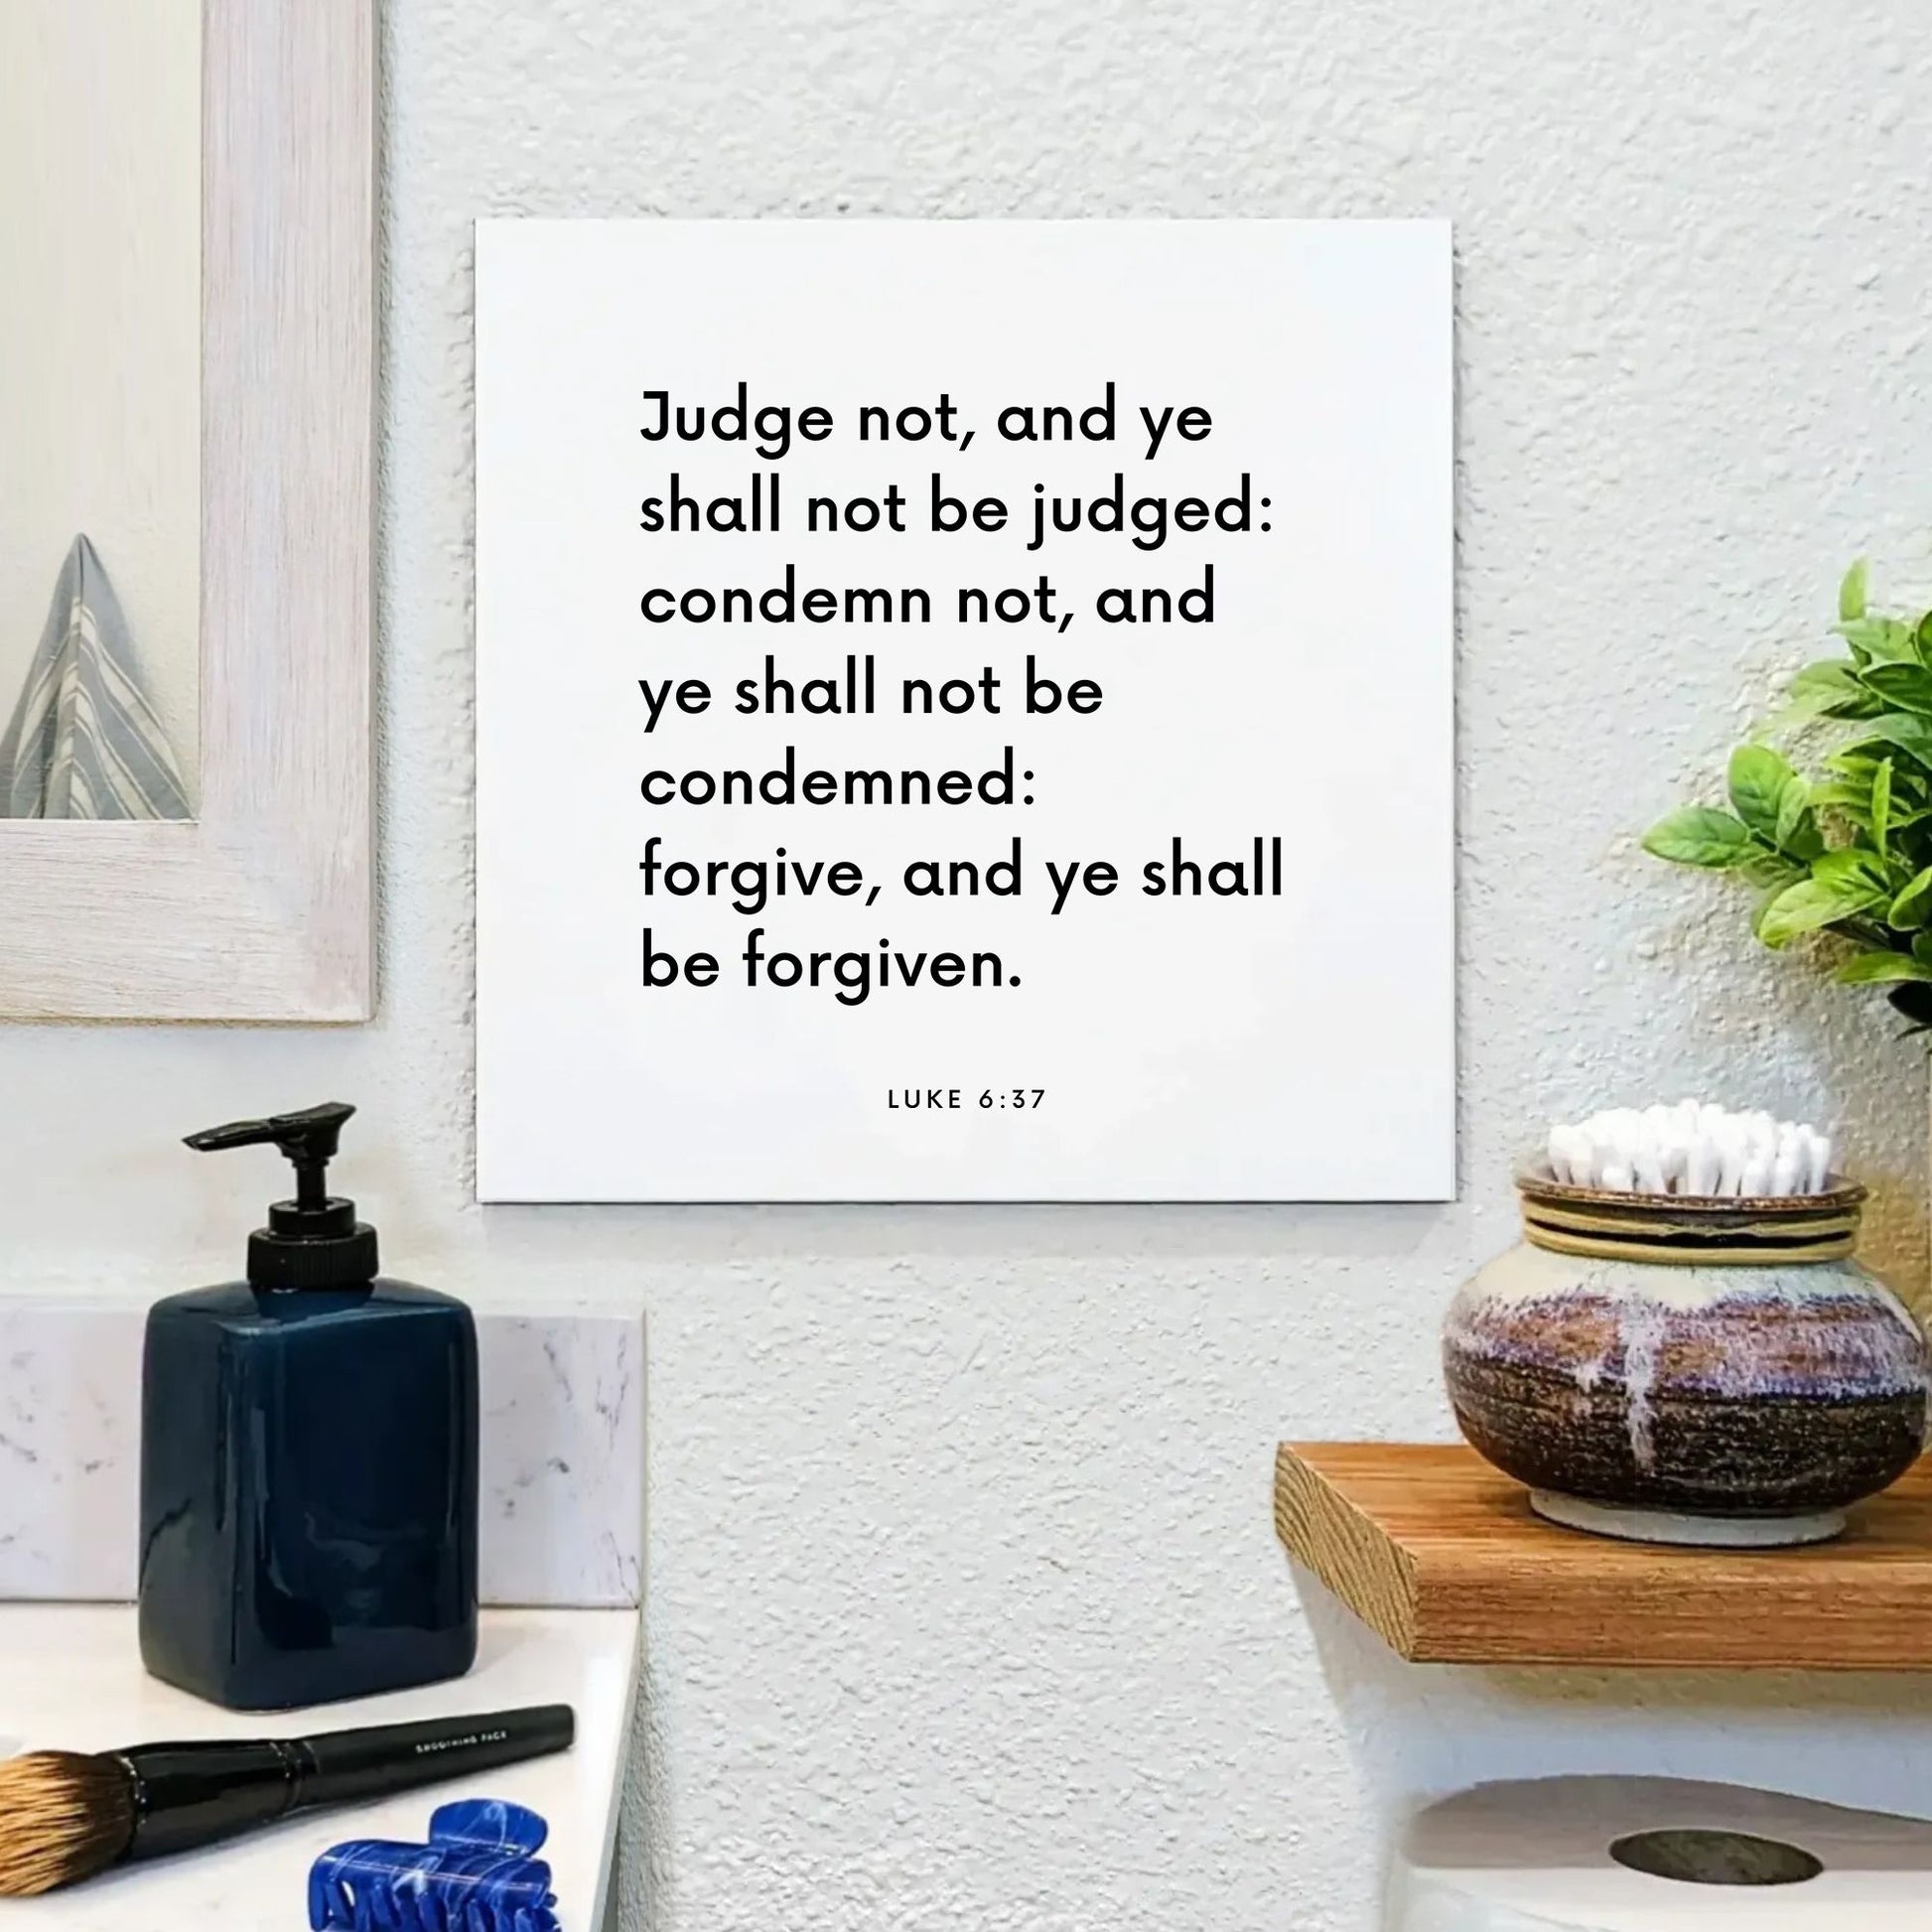 Bathroom mouting of the scripture tile for Luke 6:37 - "Judge not, and ye shall not be judged"